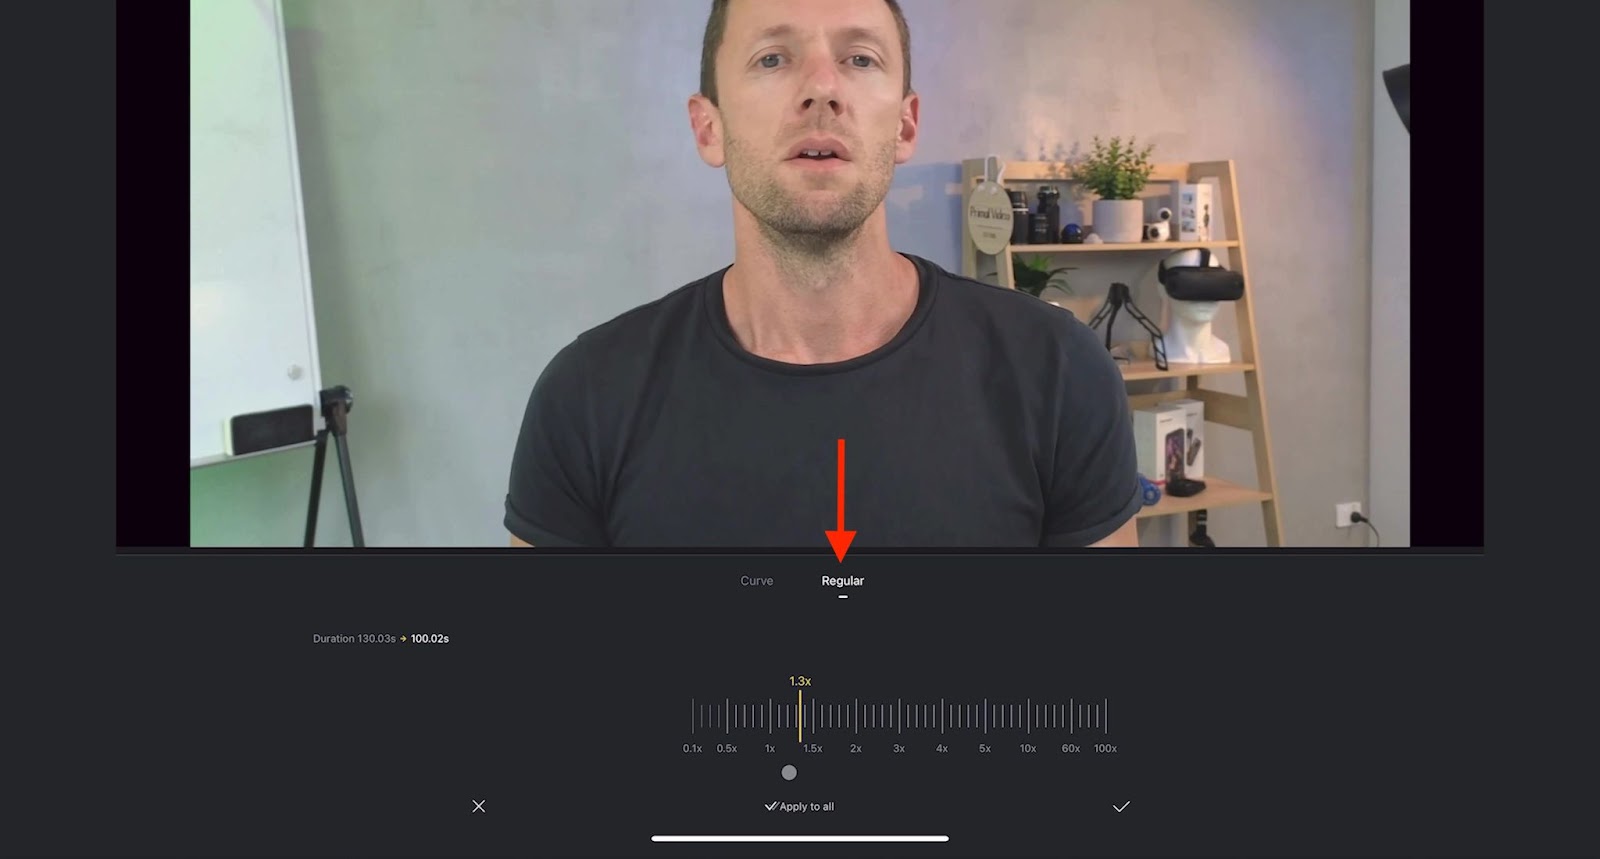 Regular settings under the Speed tool in VN Video Editor where you can slow down or speed up your video footage